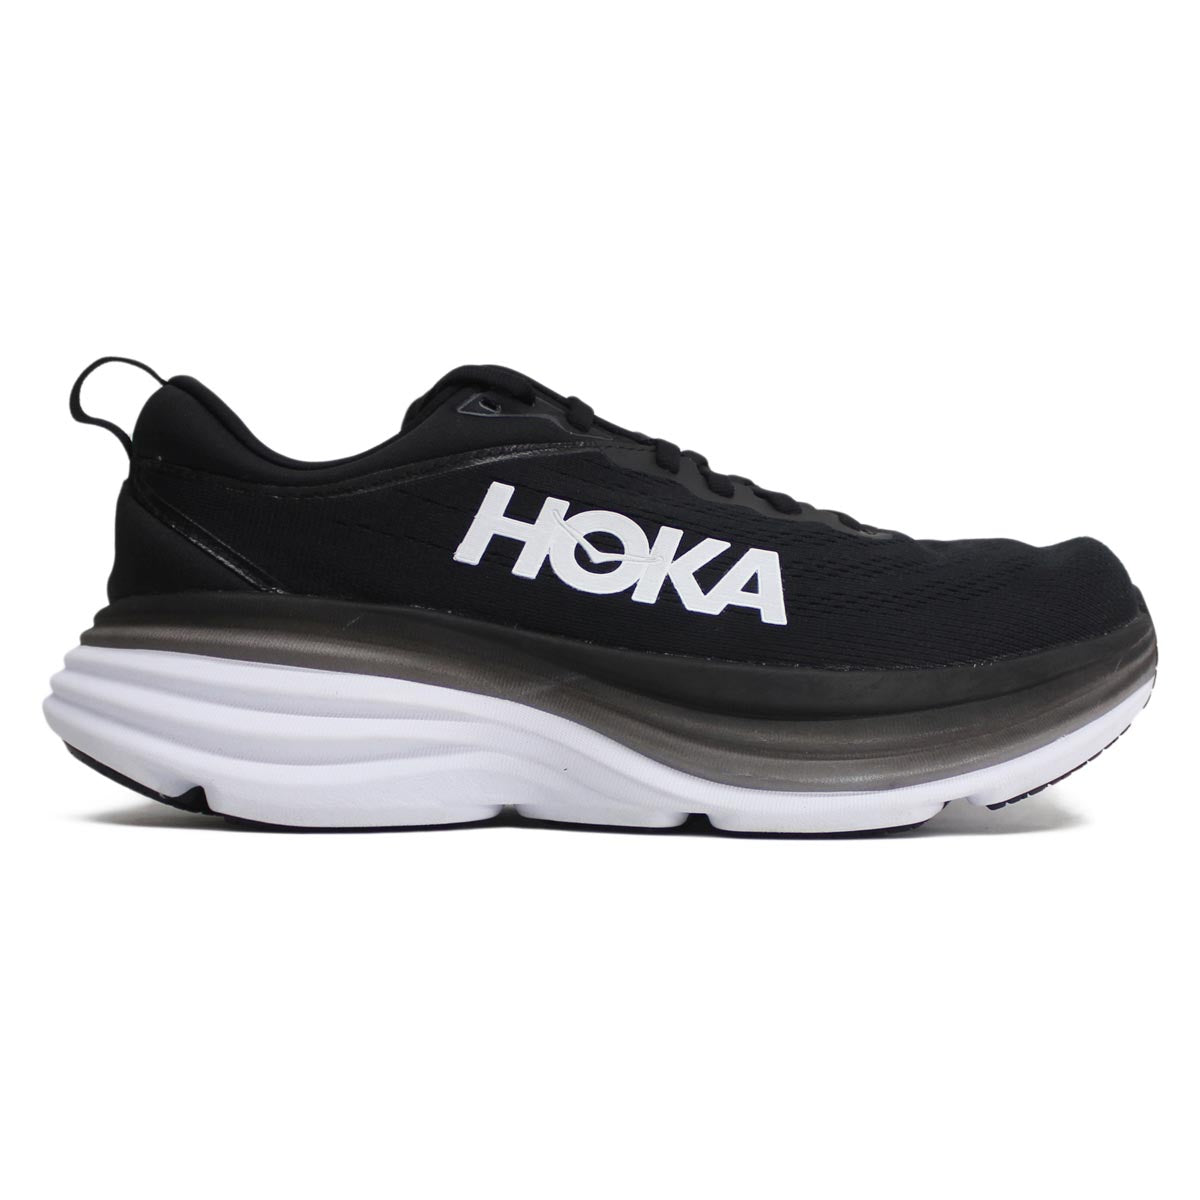 Hoka One One Womens Trainers Bondi 8 Lace-Up Low-Top Sneakers Textile - UK 8